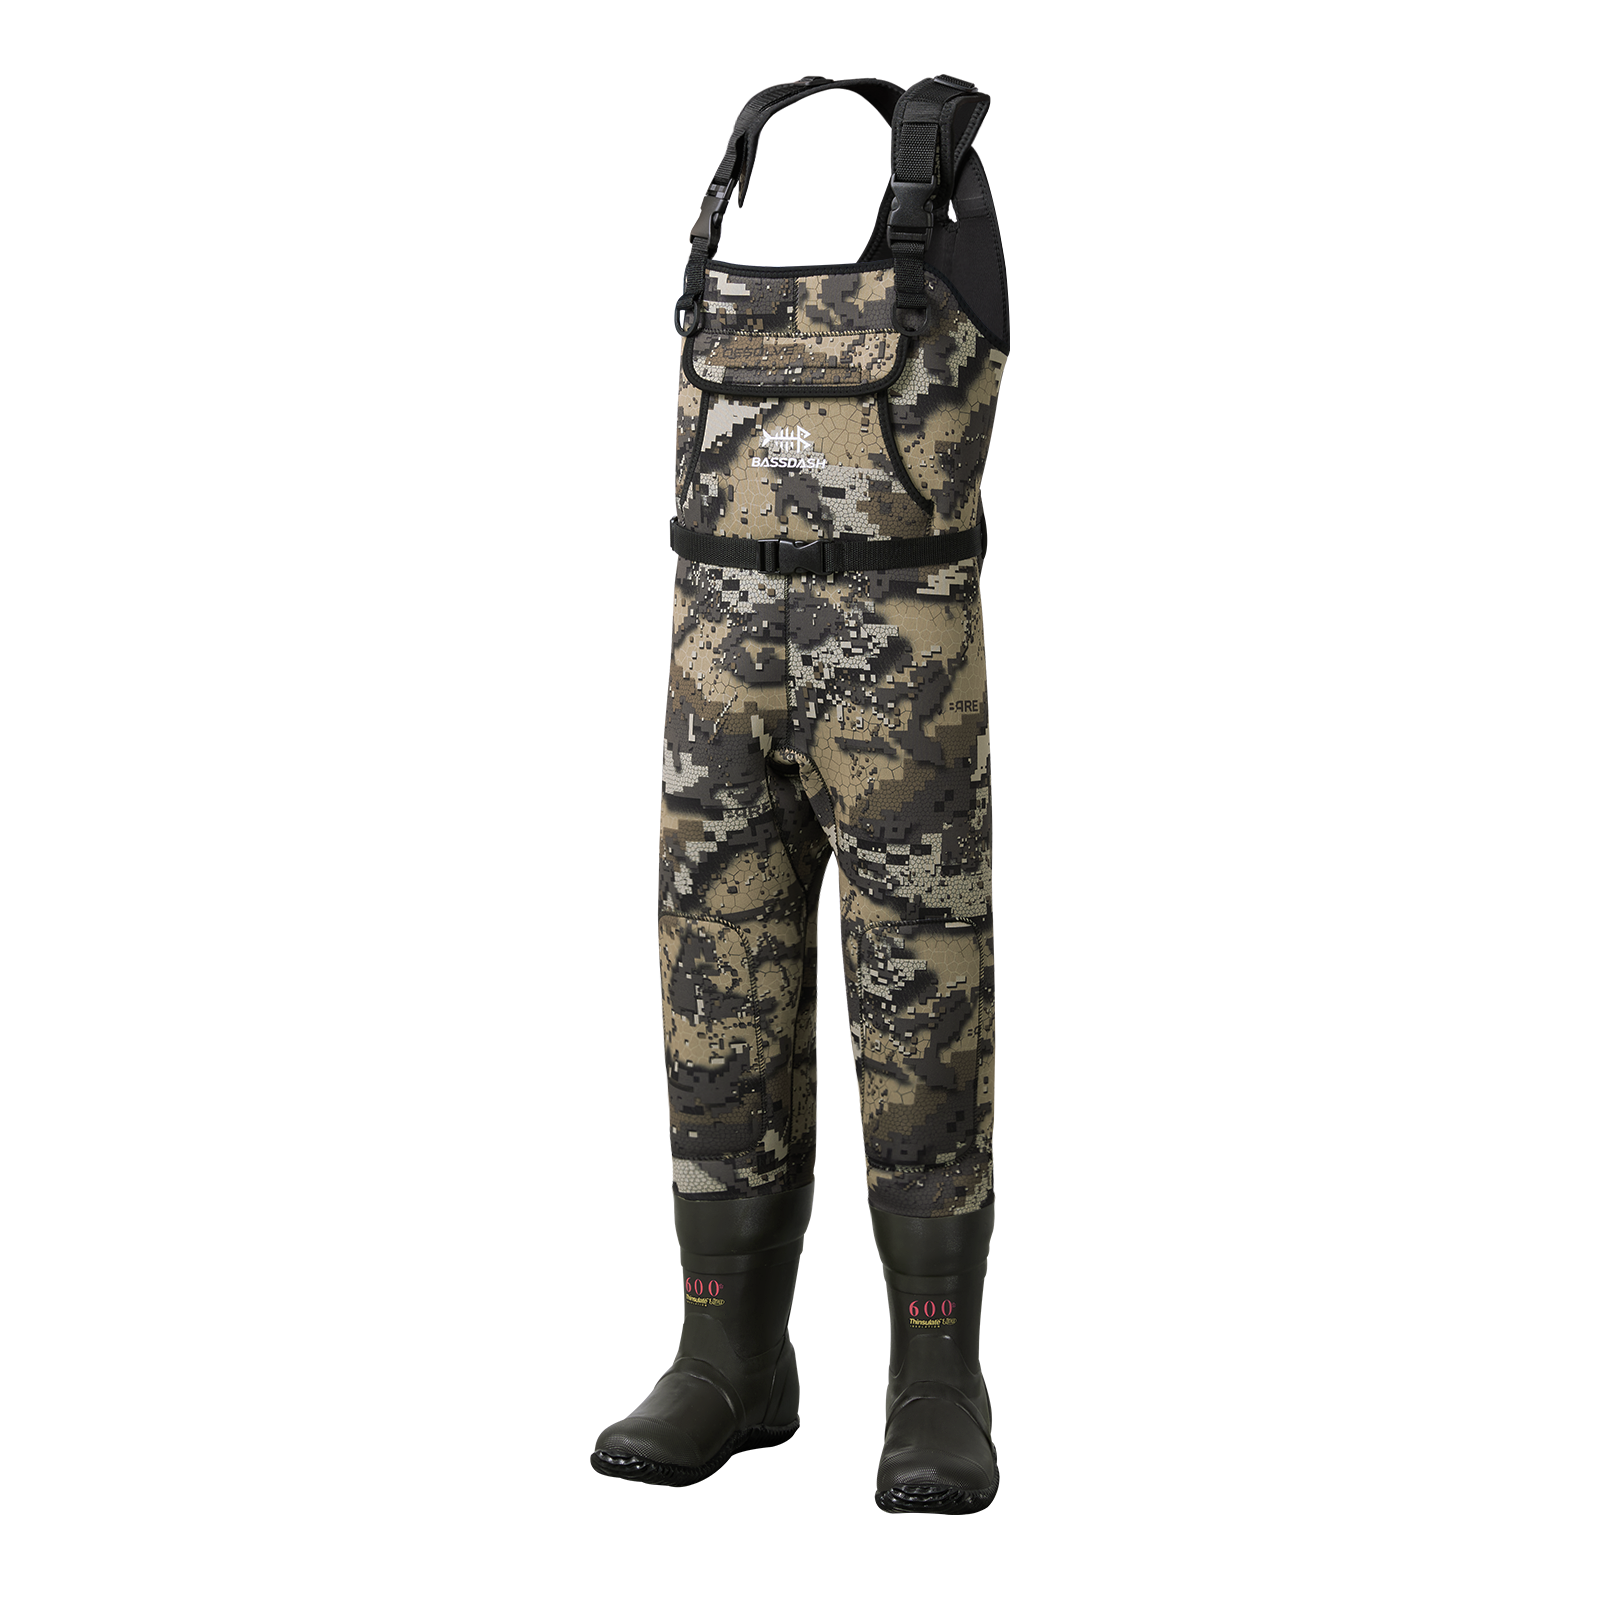  Chest Waders with Boots, Waterproof Youth Waders